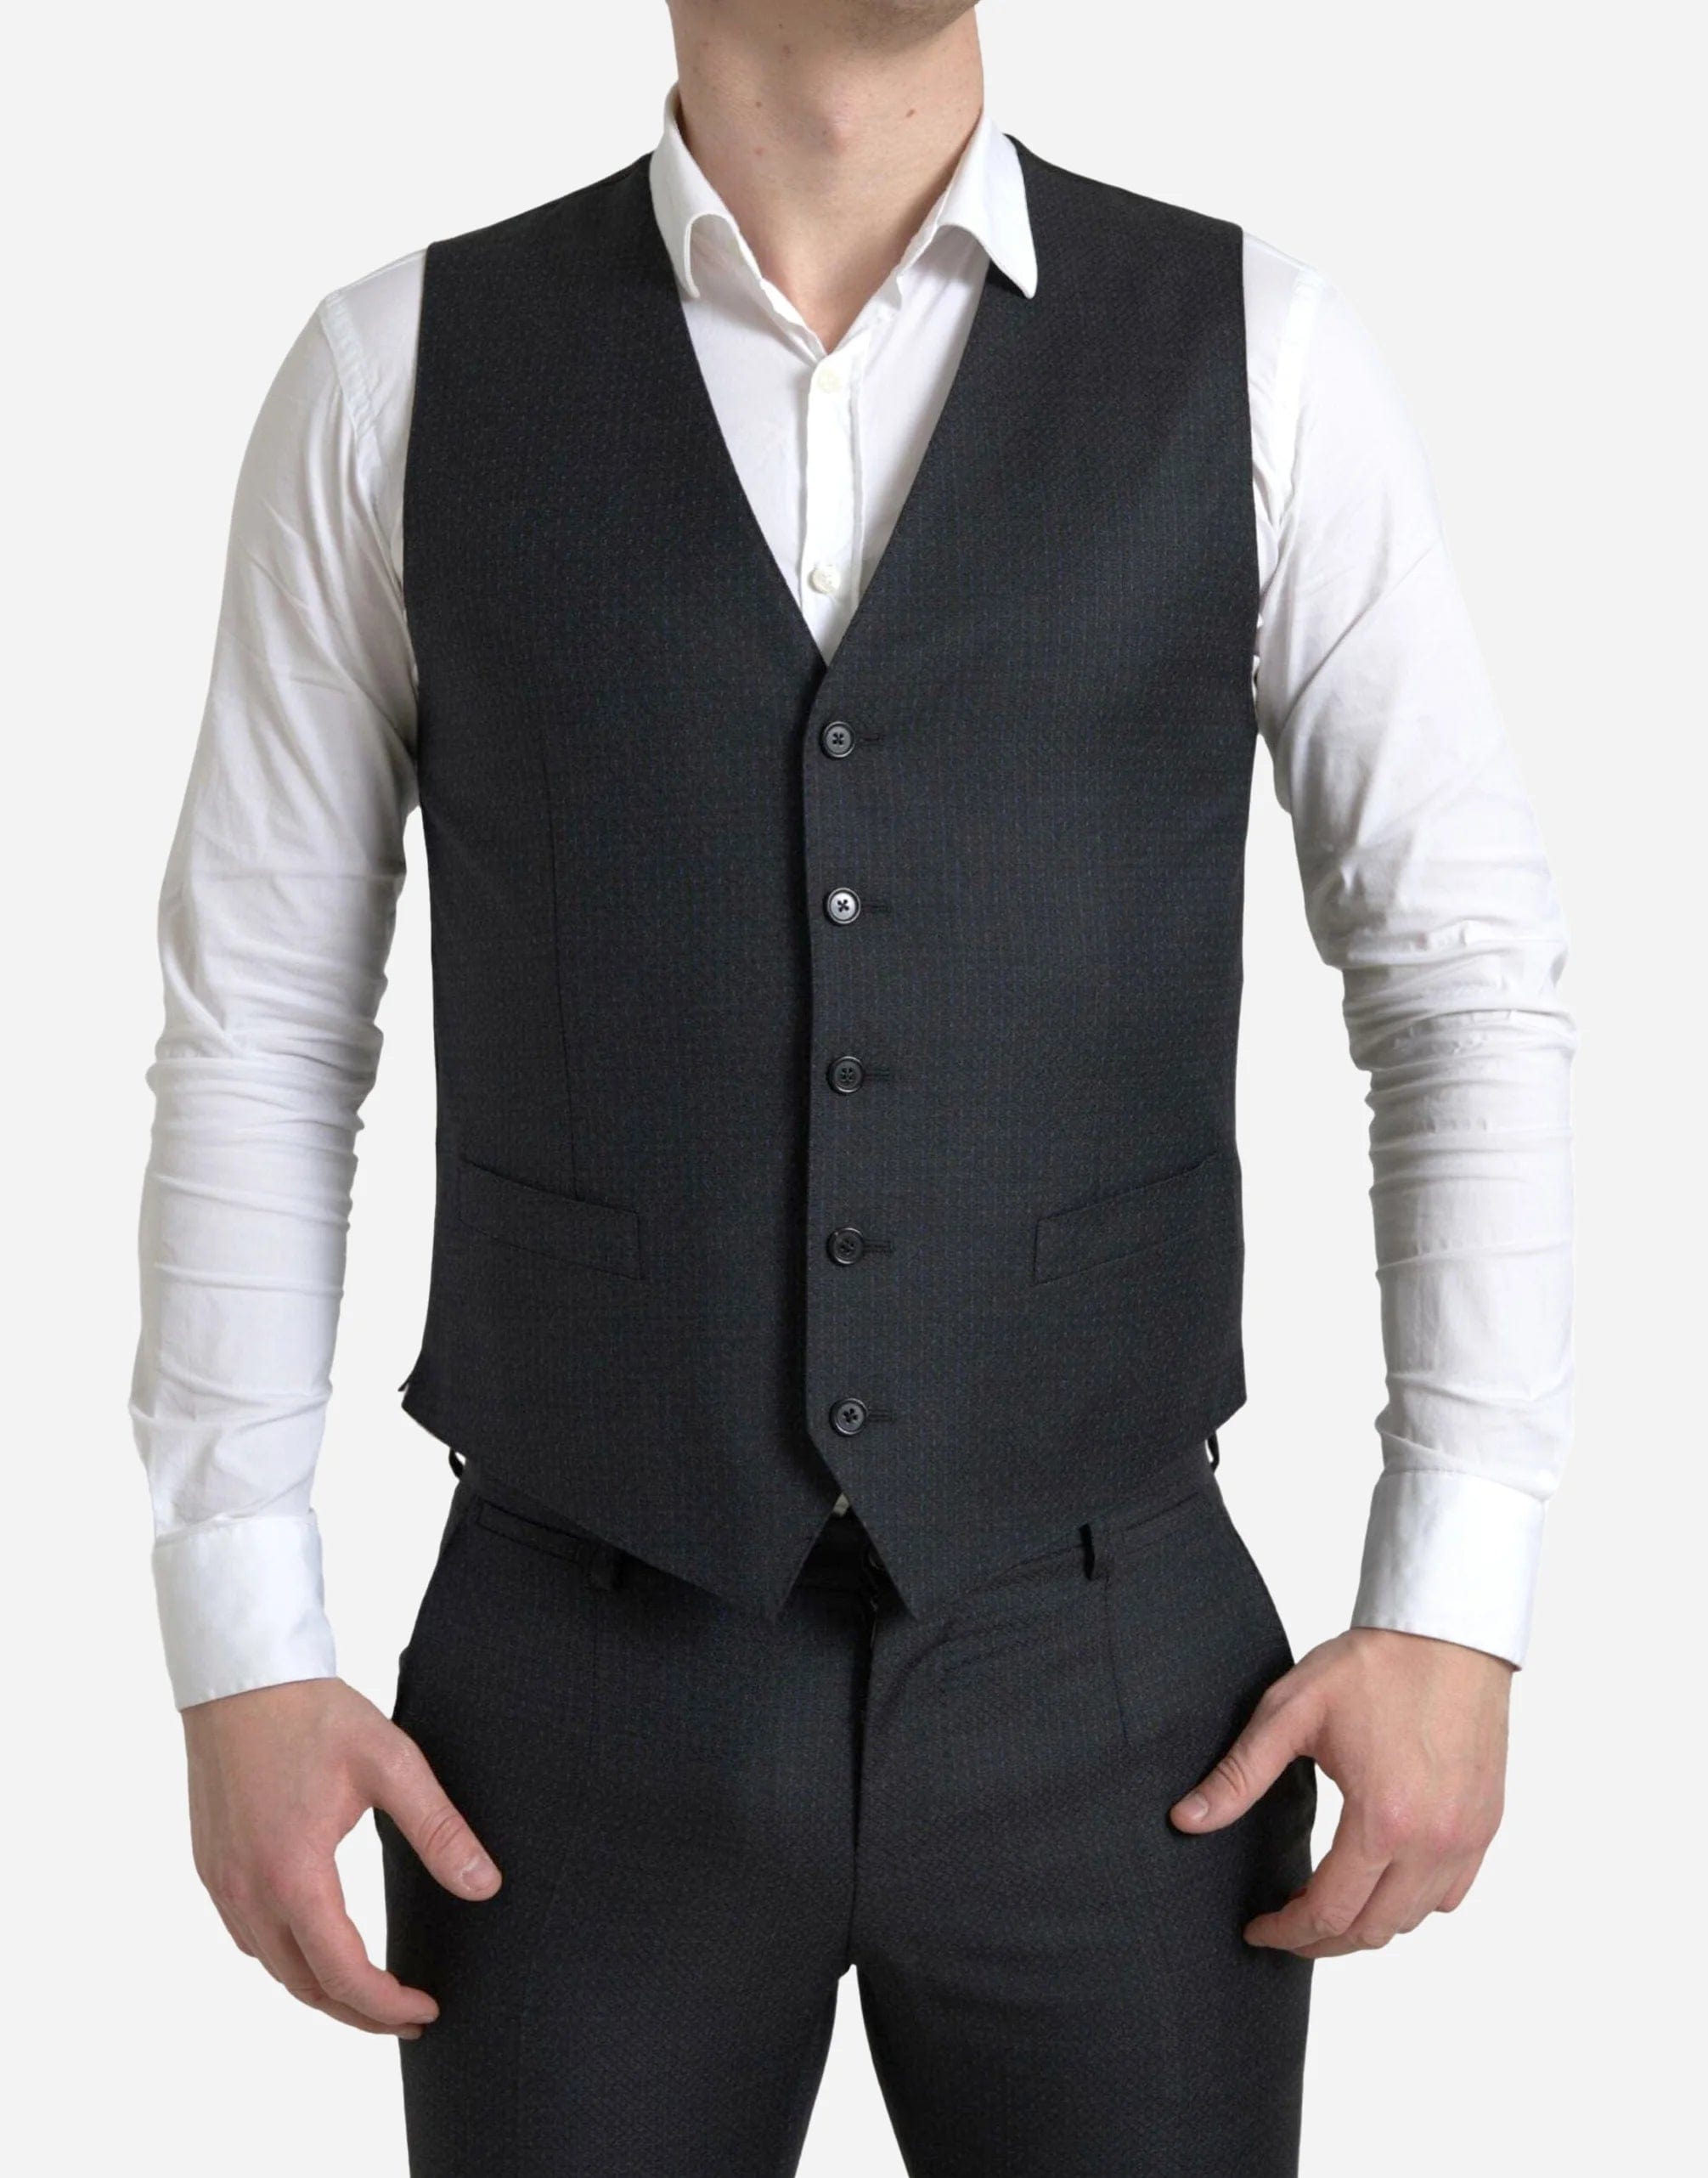 Three Piece Single Breasted Martini Suit